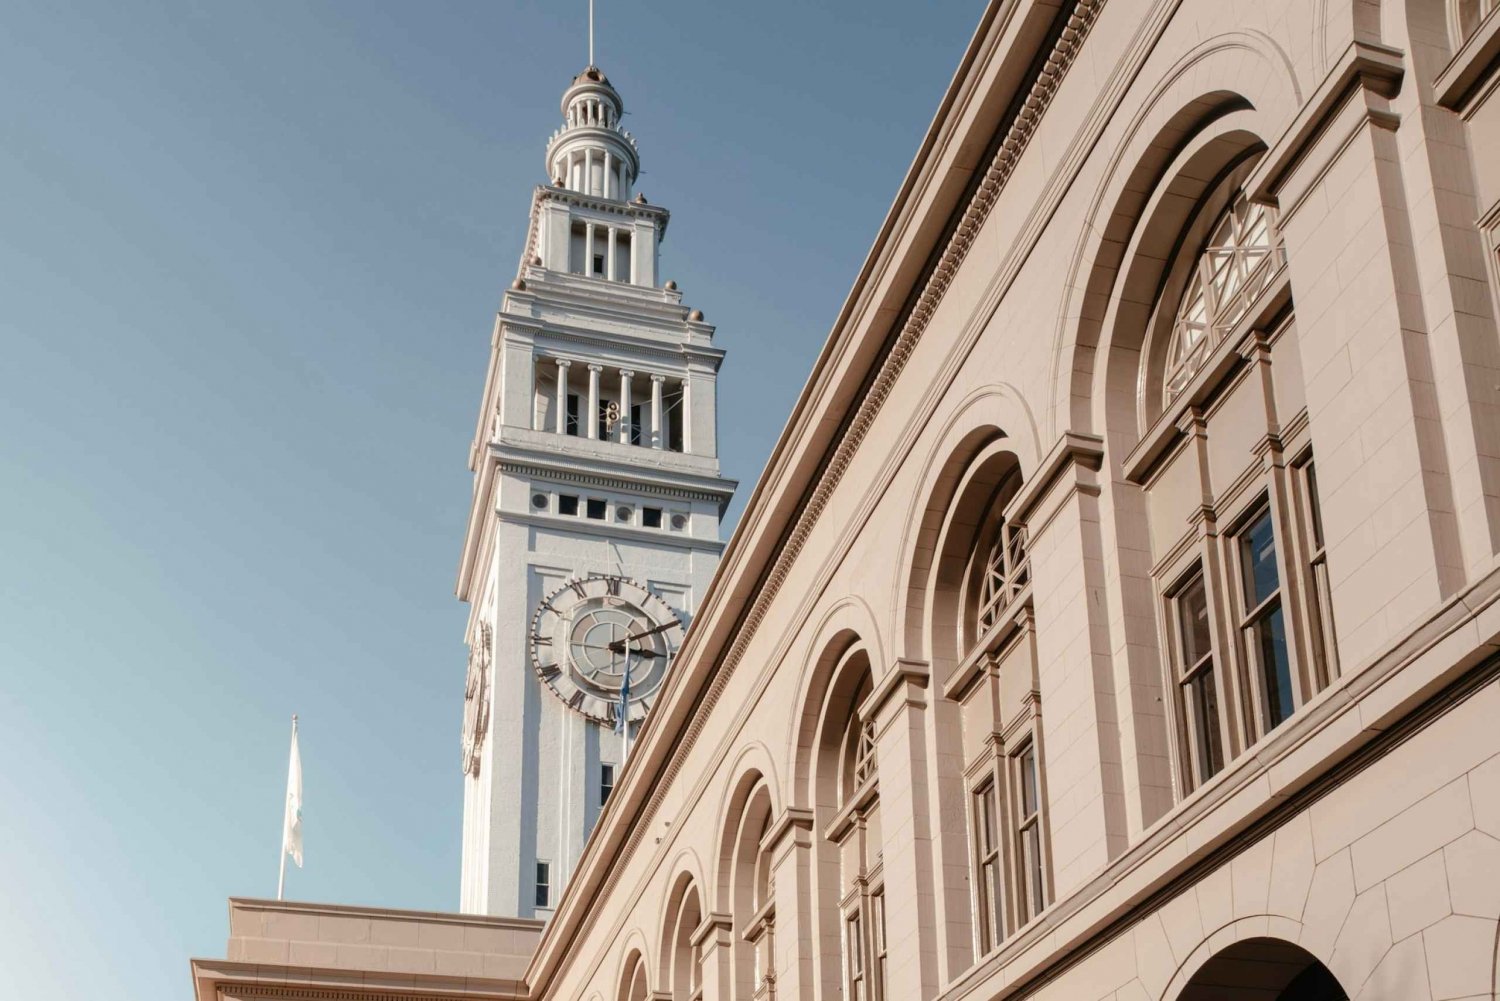 San Francisco: Urban Scavenger Hunt with Your Smartphone